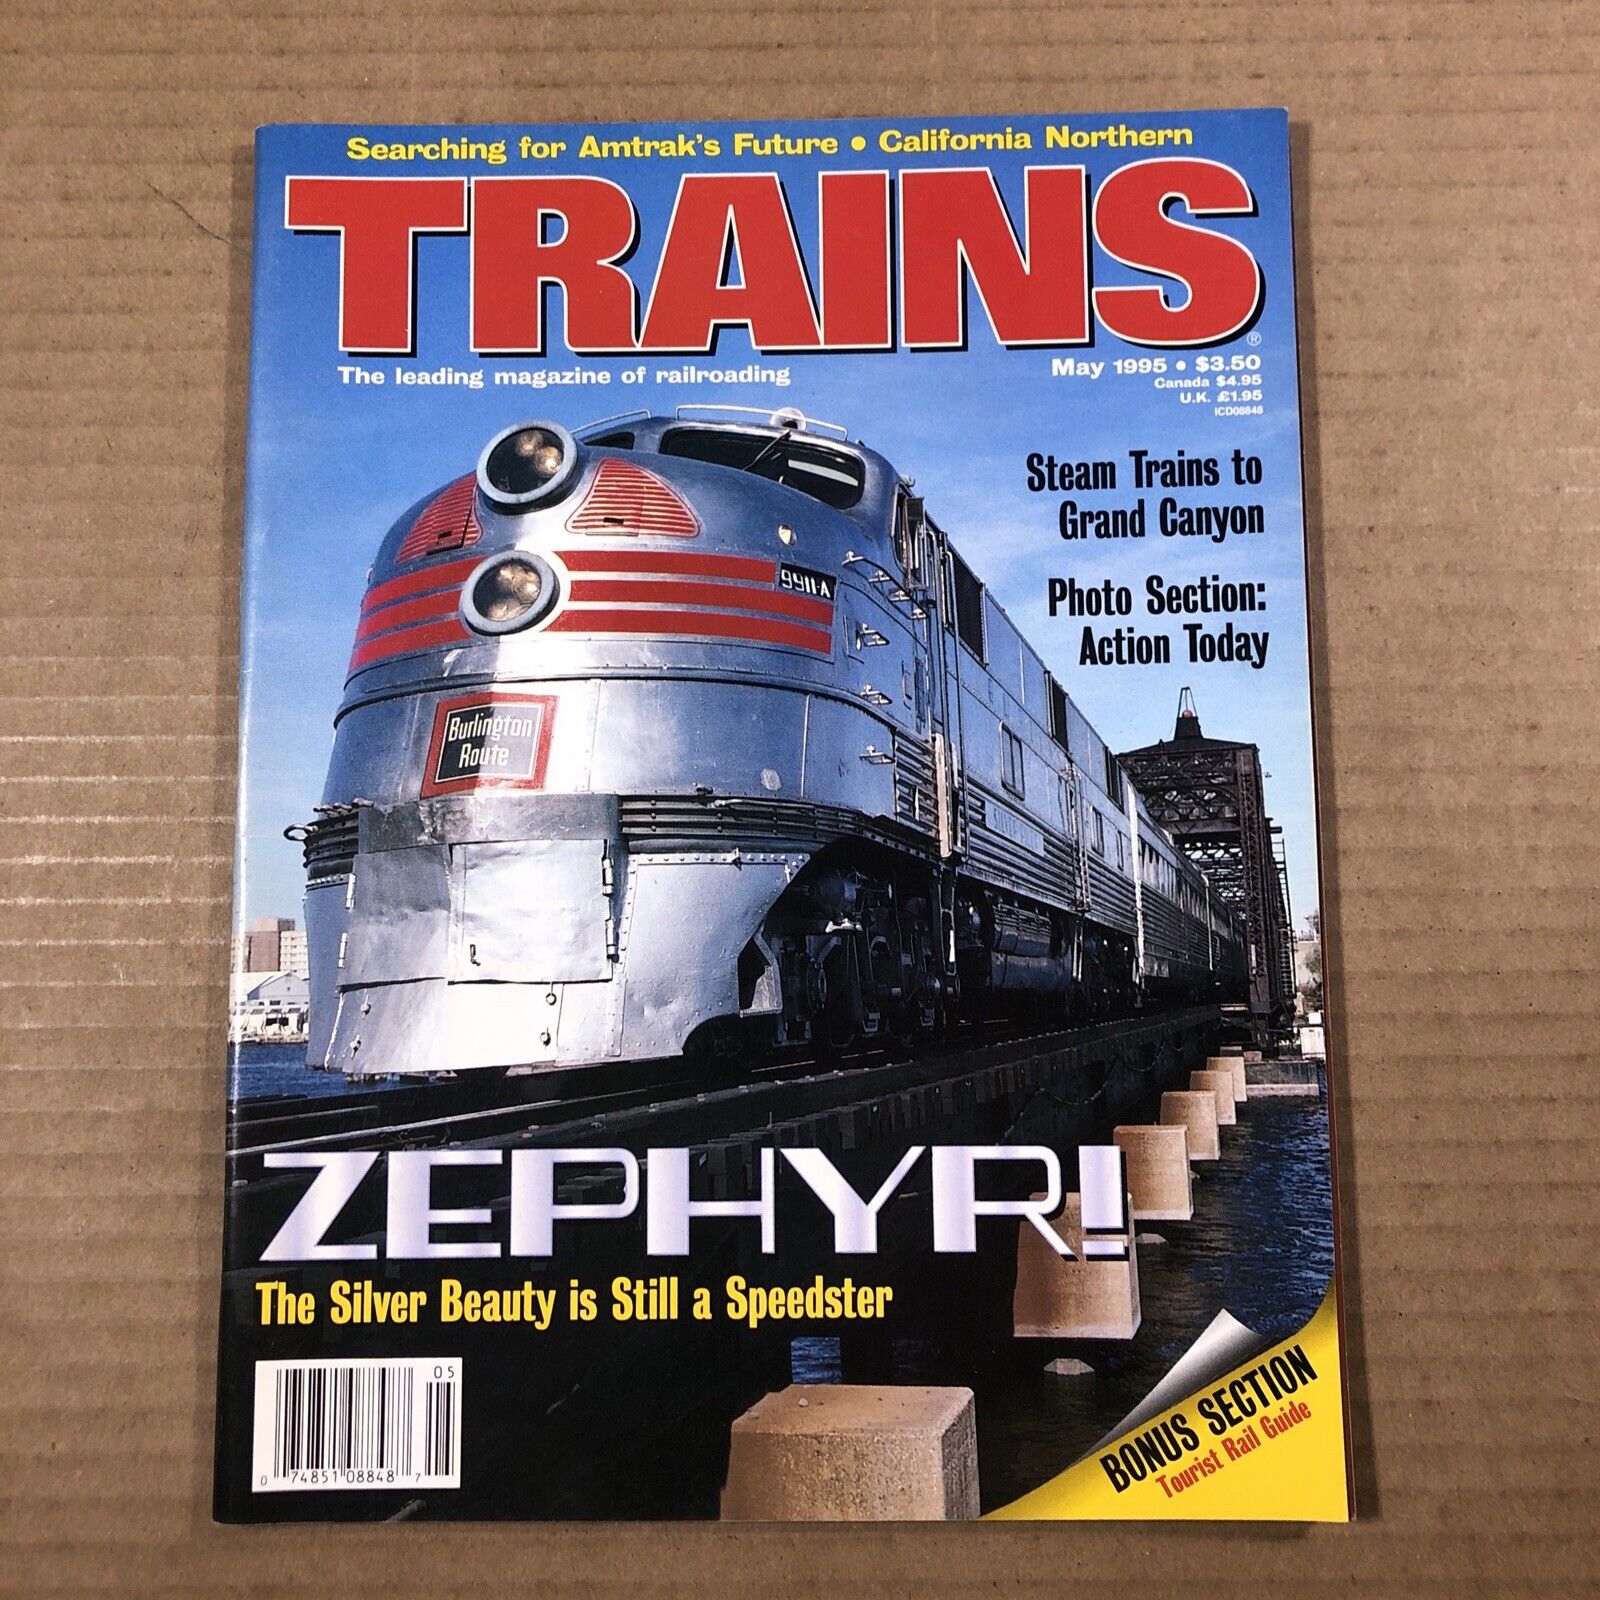 Trains, The Magazine of Railroading May 1995 Zephyr - Silver Beauty Speedster